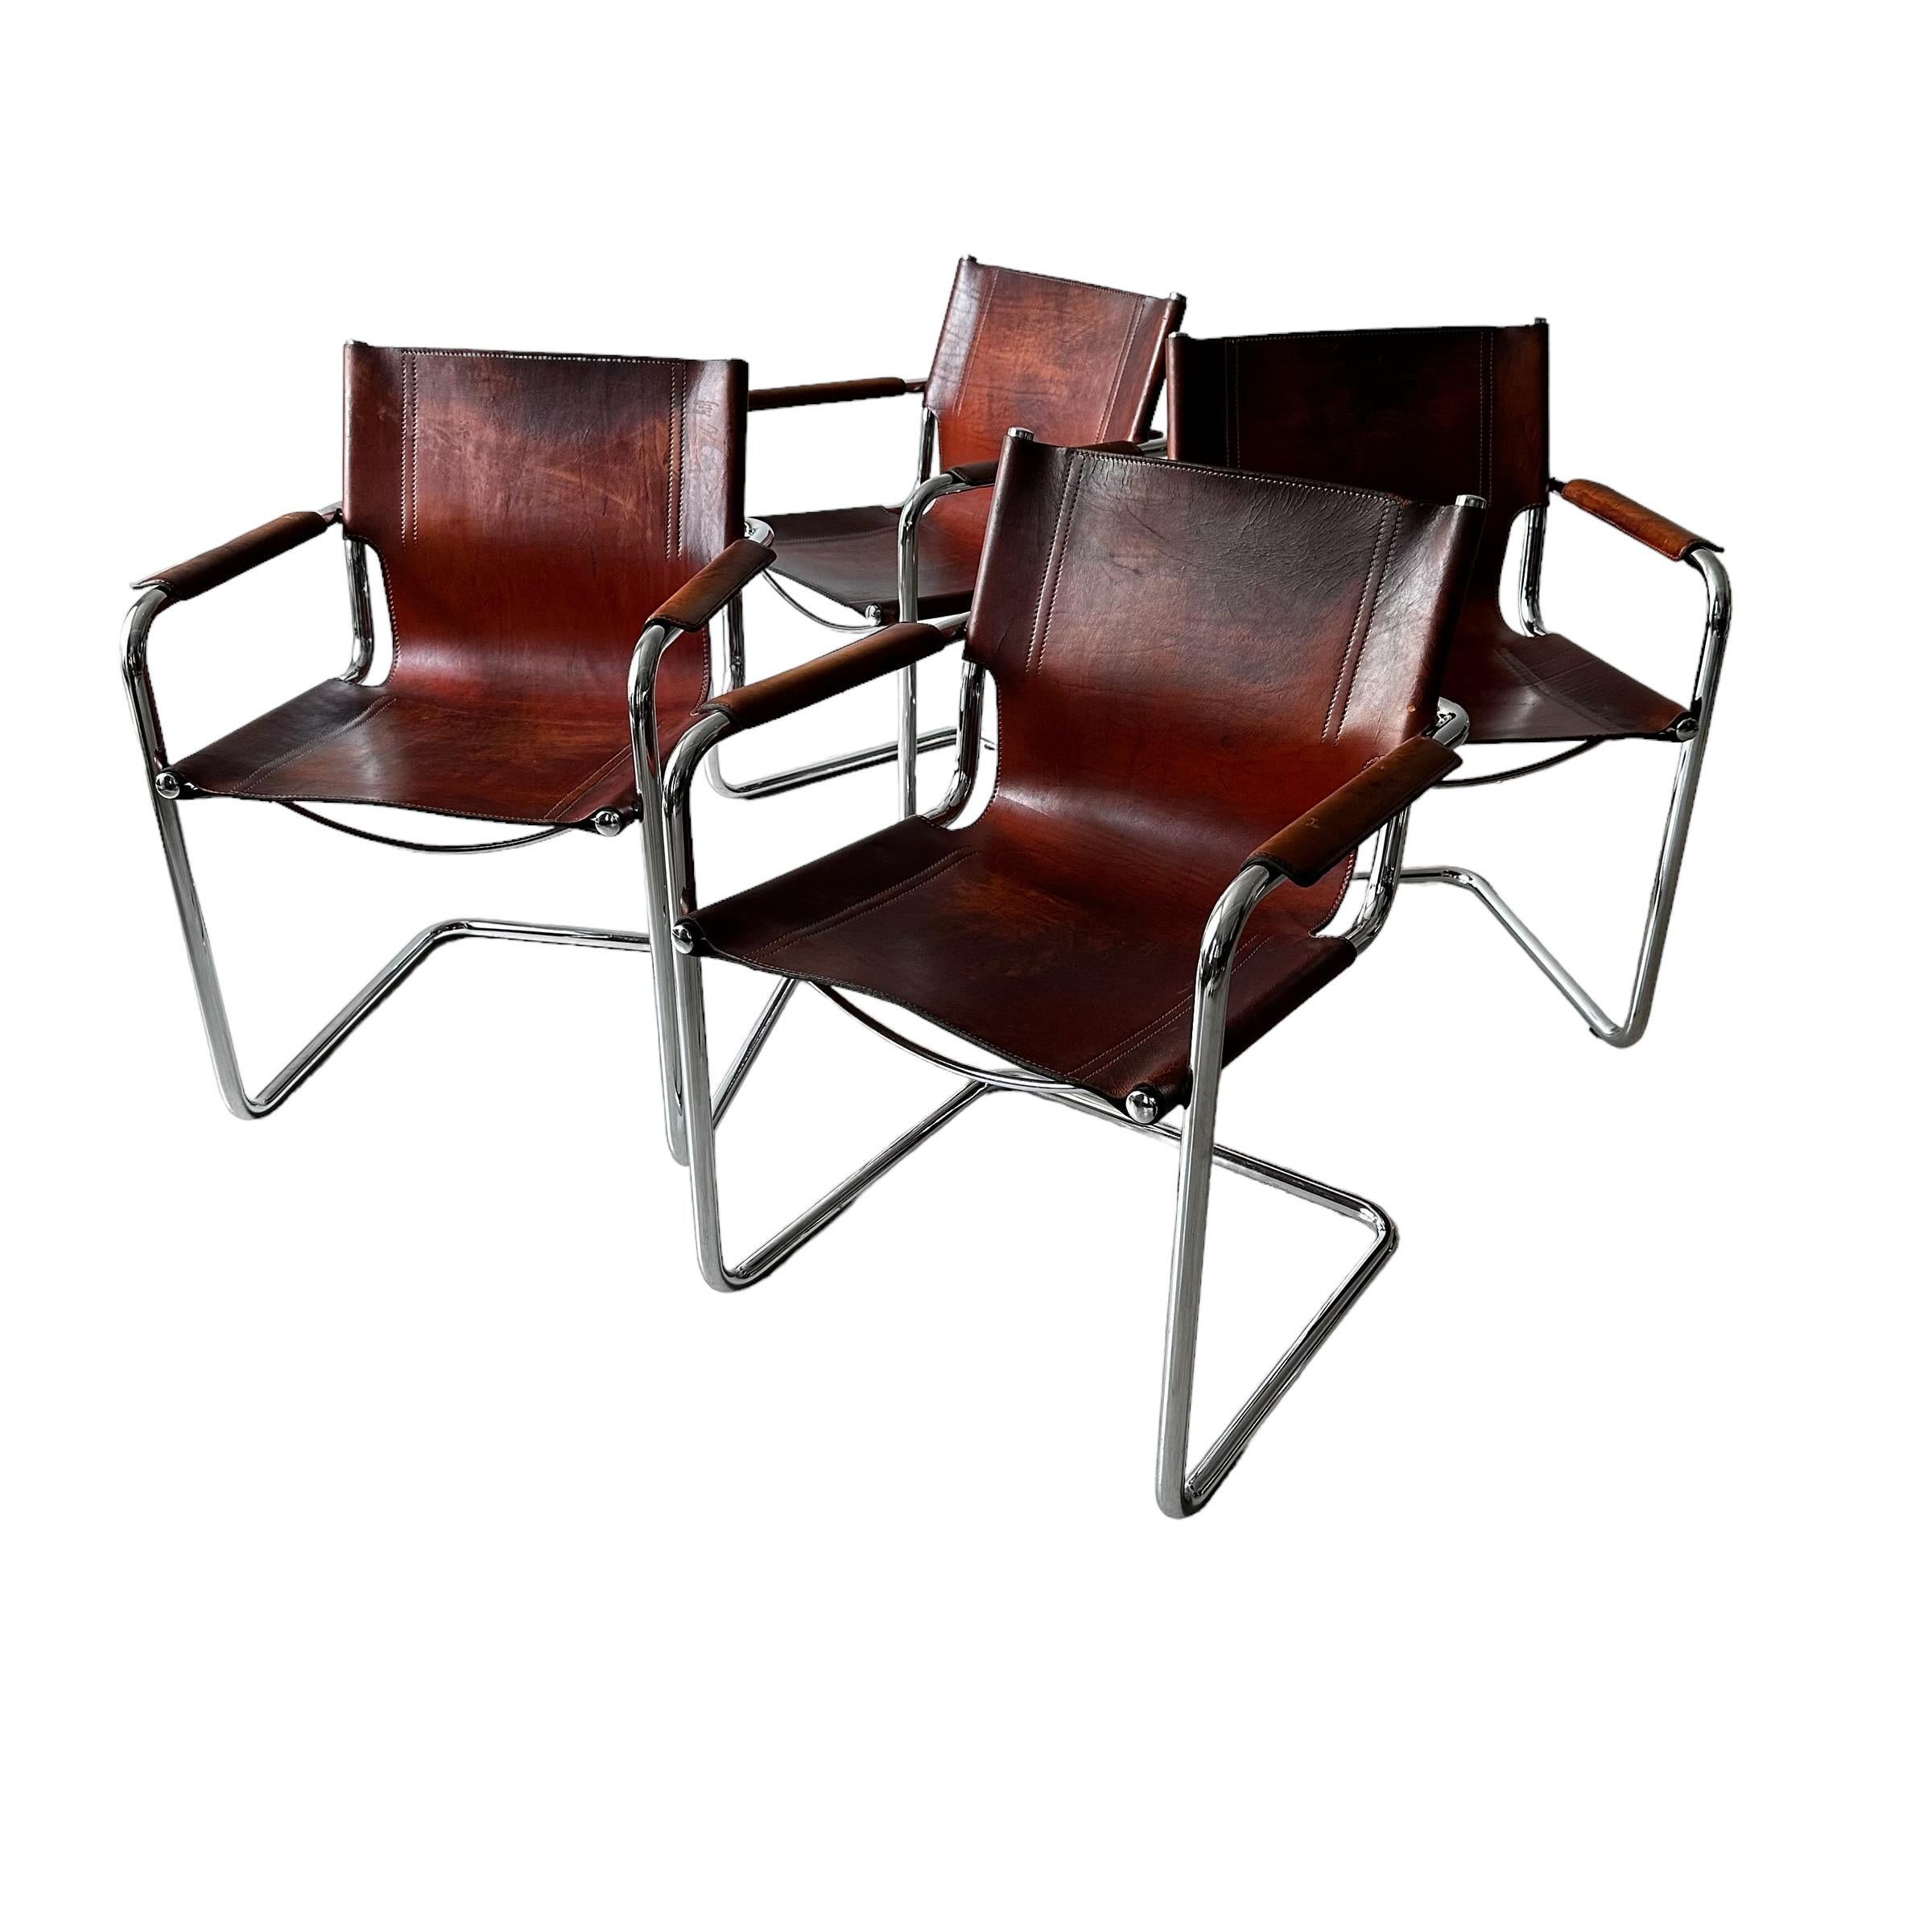 Matteo Grassi, Set of 4 Armchairs in Patinated Cognac Leather, Italy 1970s